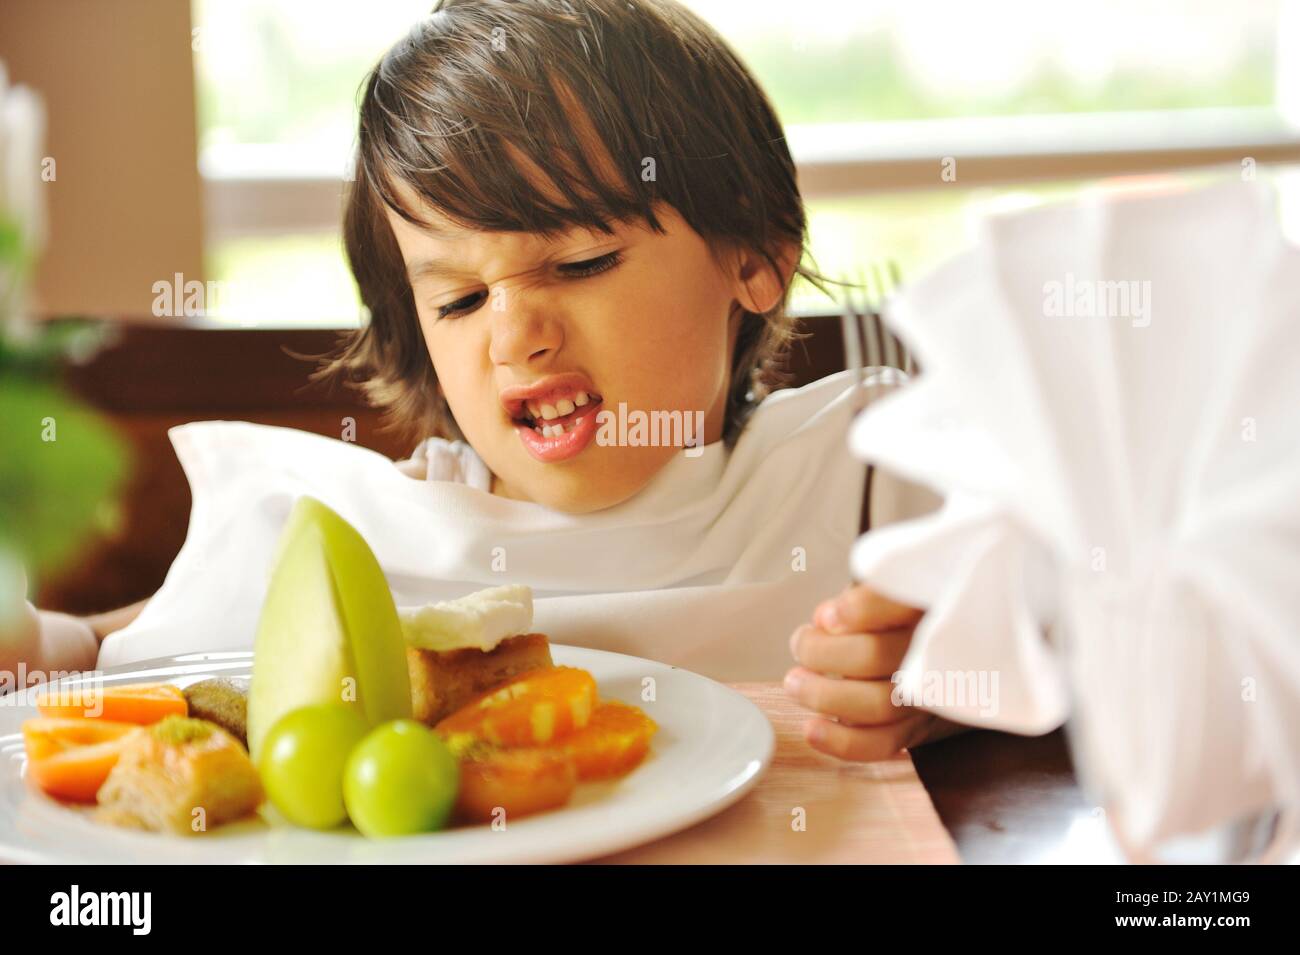 Refusing food, kid does not want to eat Stock Photo